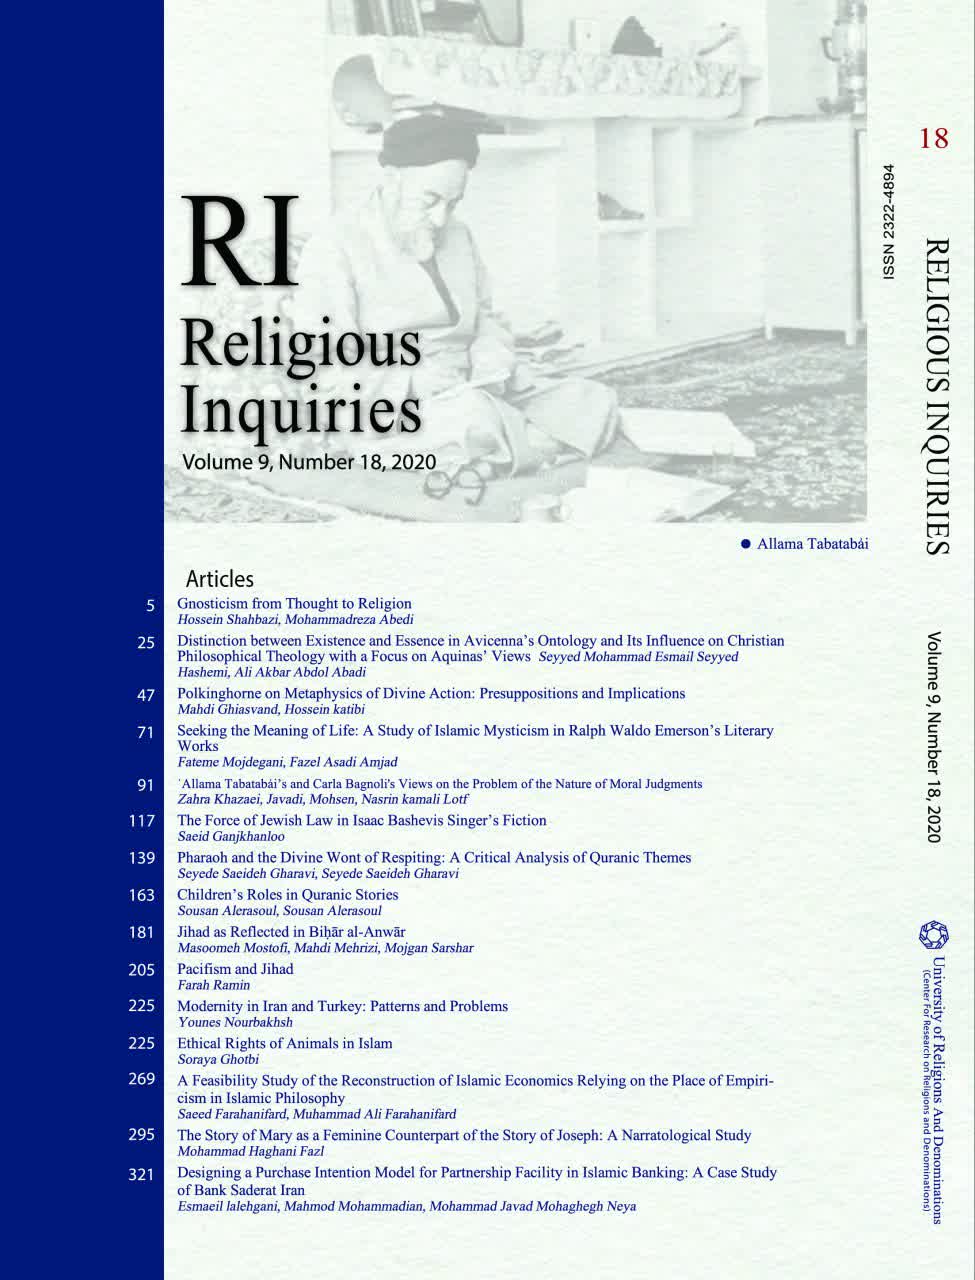 An Analytical-Critical Reading of the Confrontation of Religion and Human Sciences in Contemporary Iran